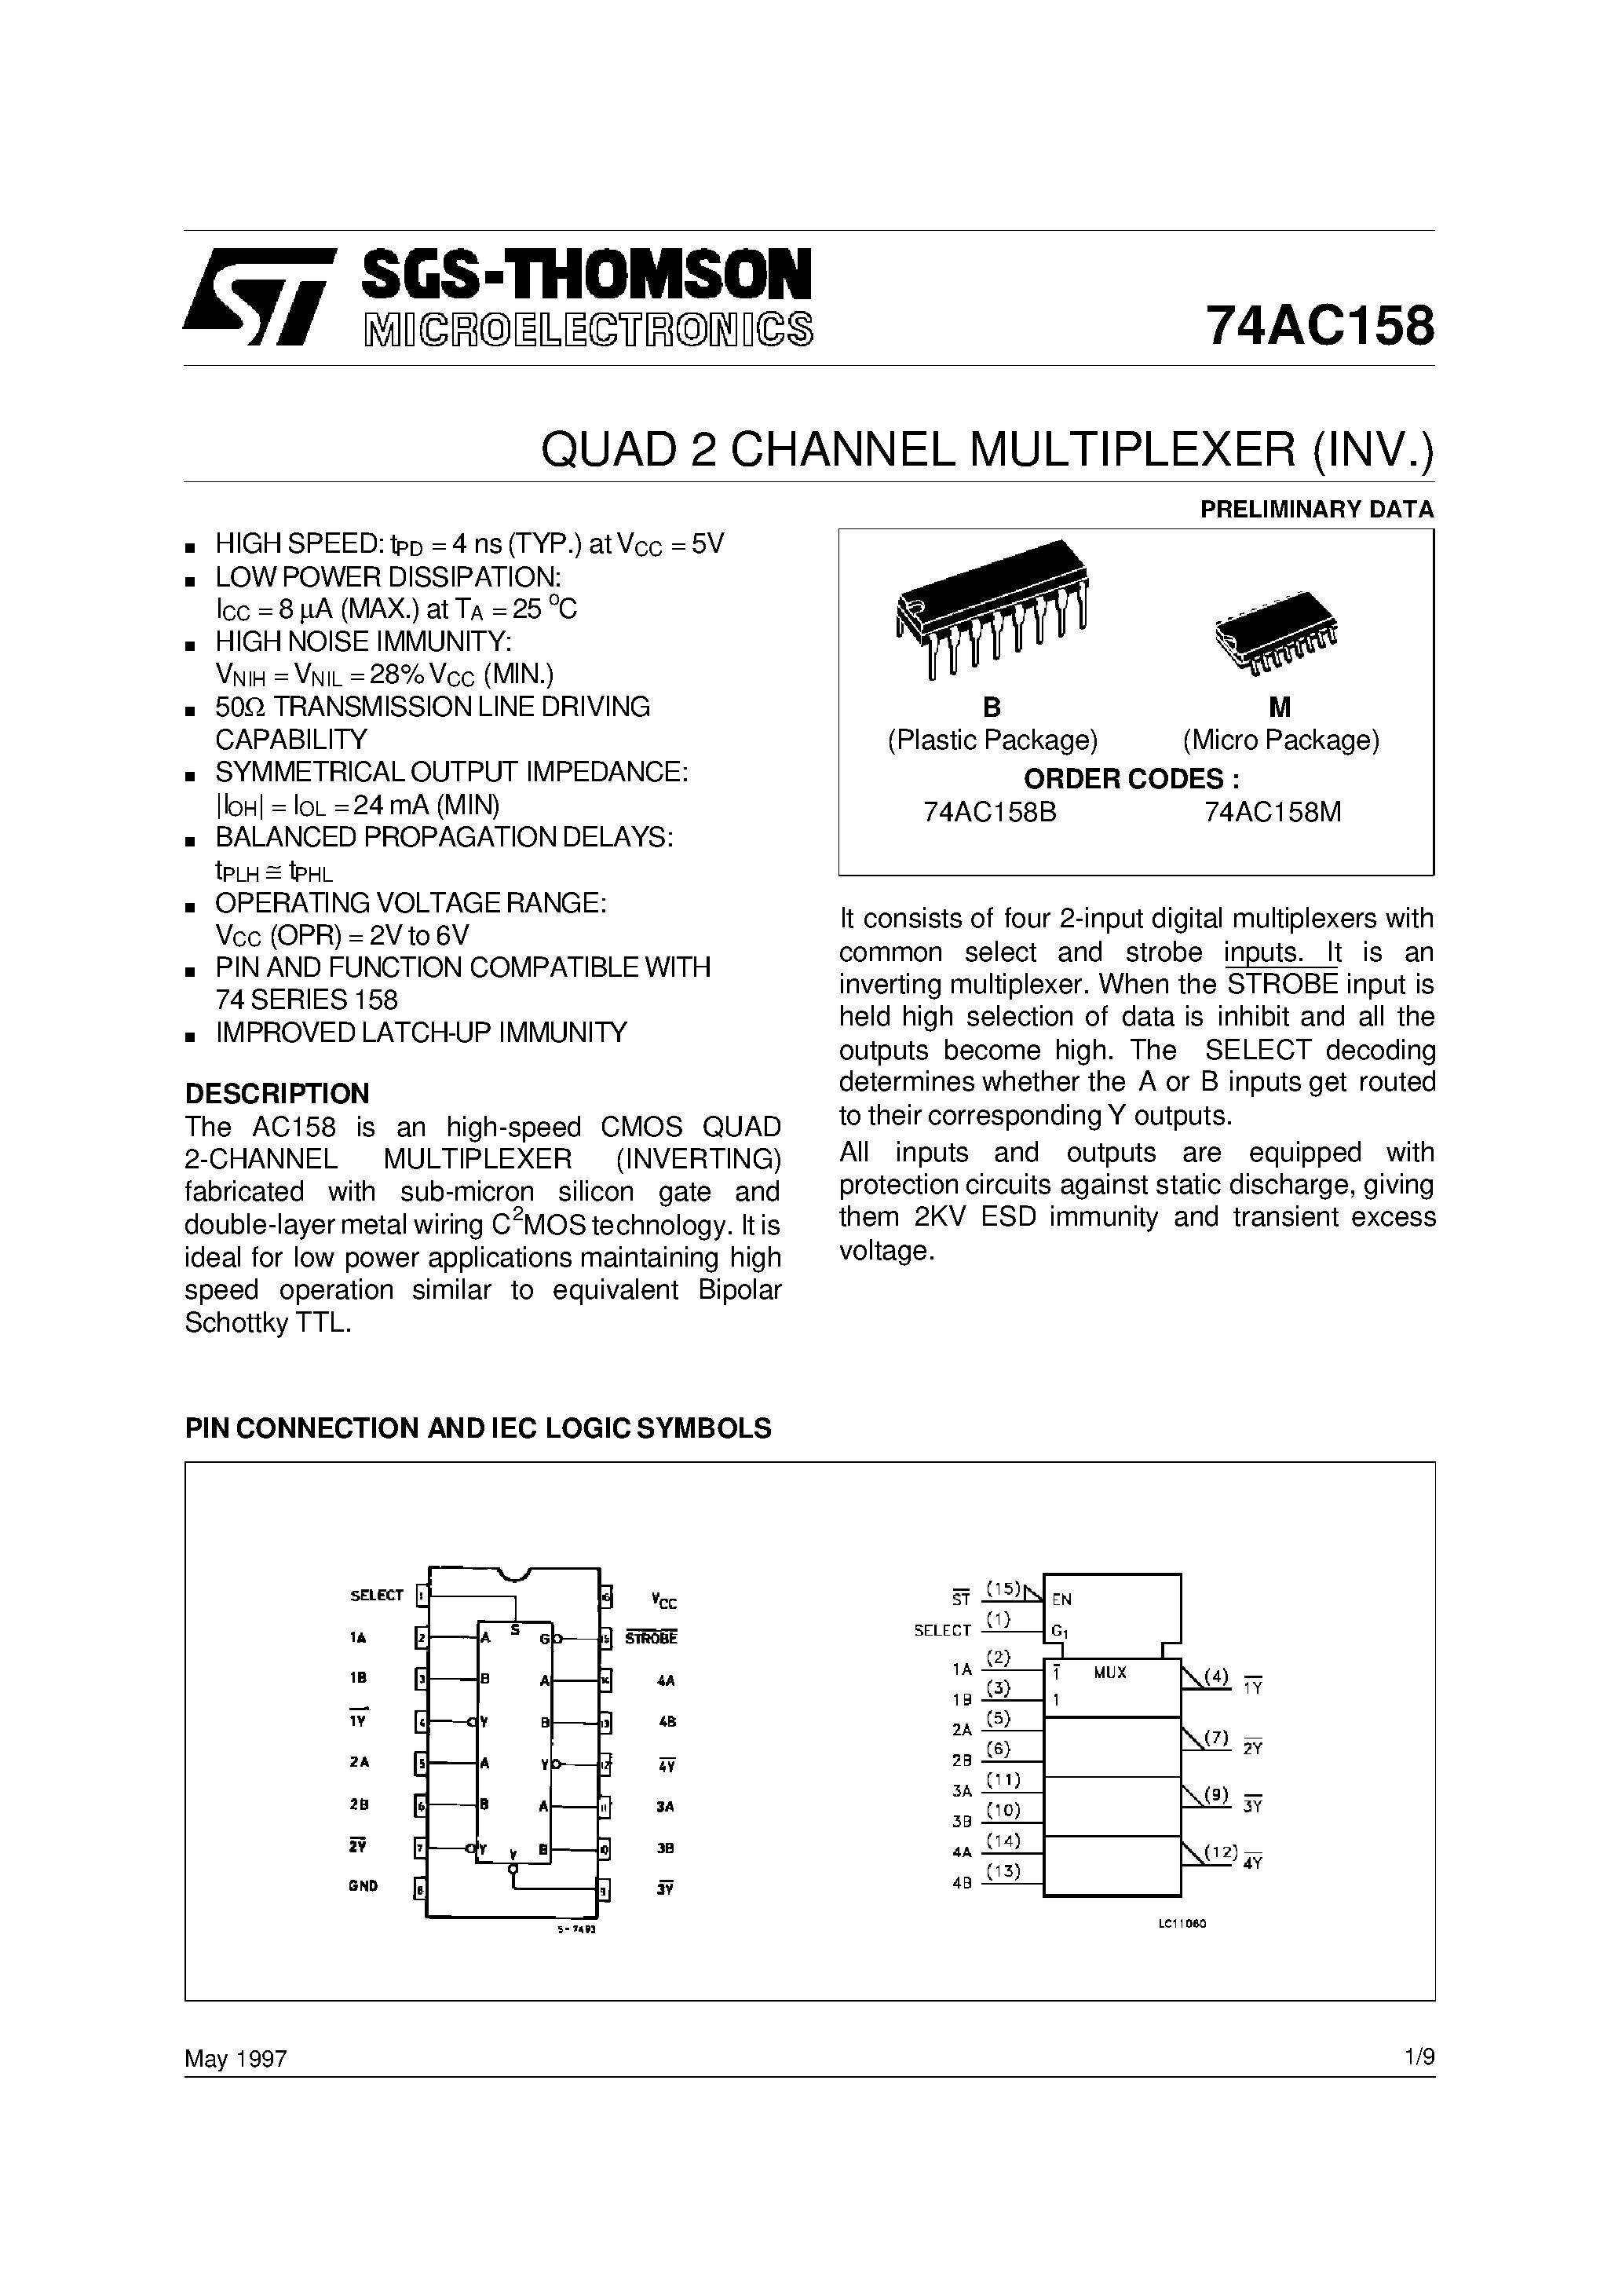 Datasheet 74AC158M - QUAD 2 CHANNEL MULTIPLEXER INV. page 1